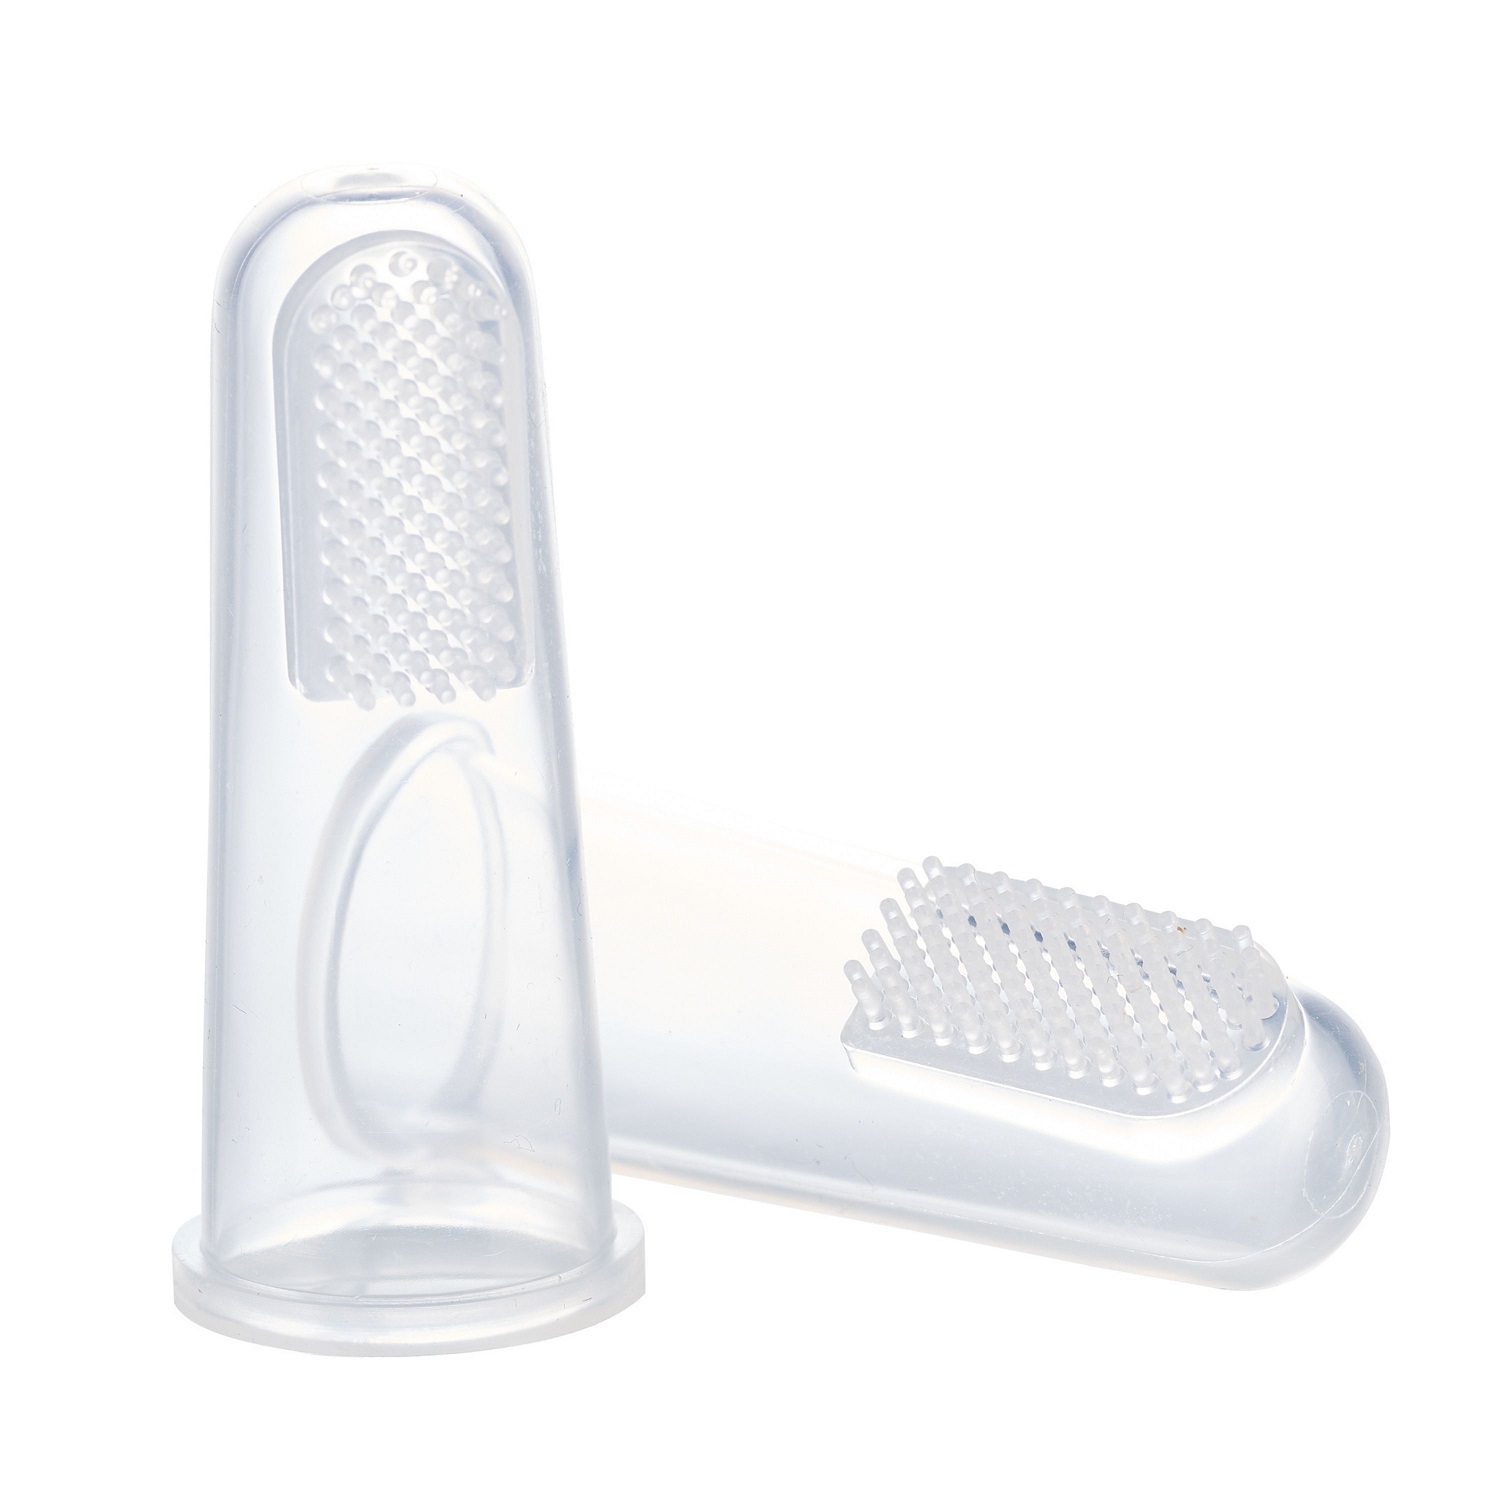 2 doigtiers brosse à dent silicone BLANC Thermobaby